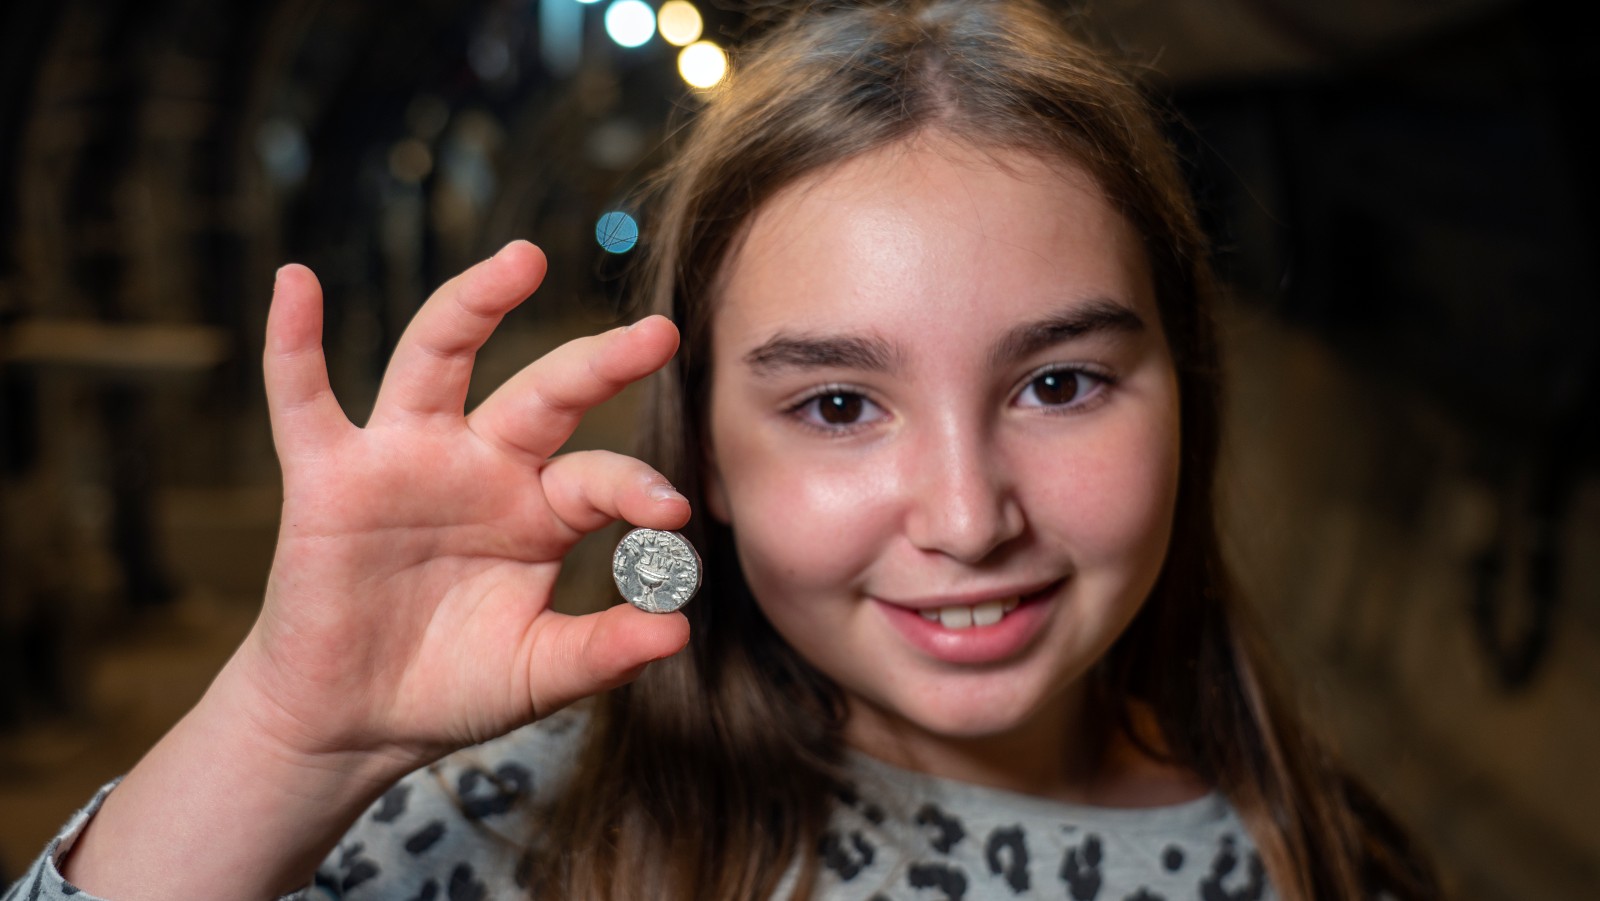 Liel Krutokop, 11, with the 2,000-year-old coin she found. Photo by Yaniv Berman/City of David and Israel Antiquities Authority